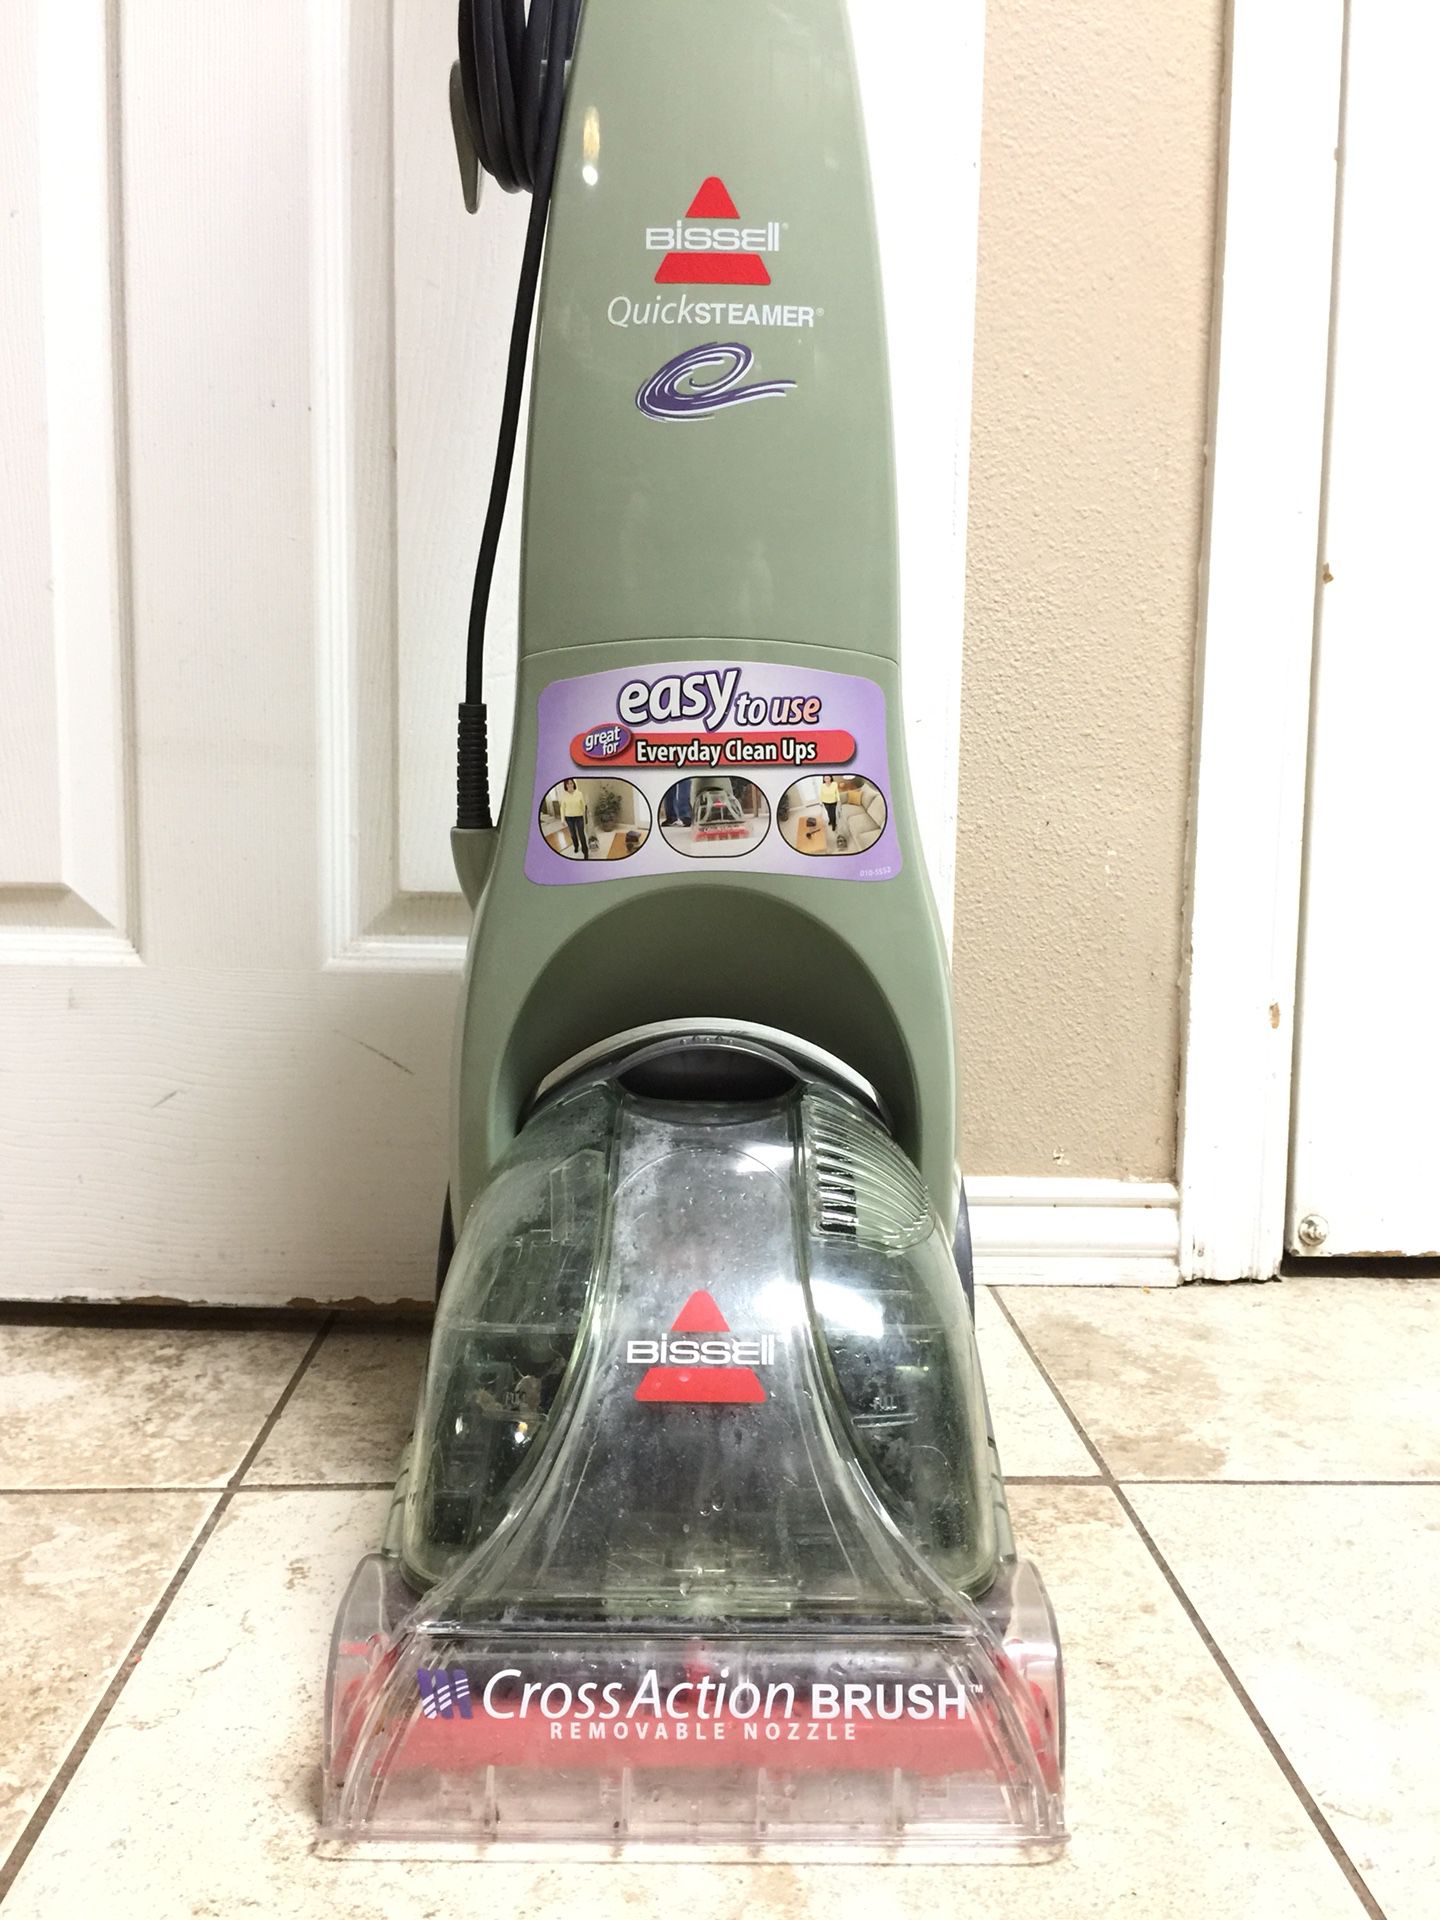 A Bissell 1970E quickwash cross action brush carpet cleaner with